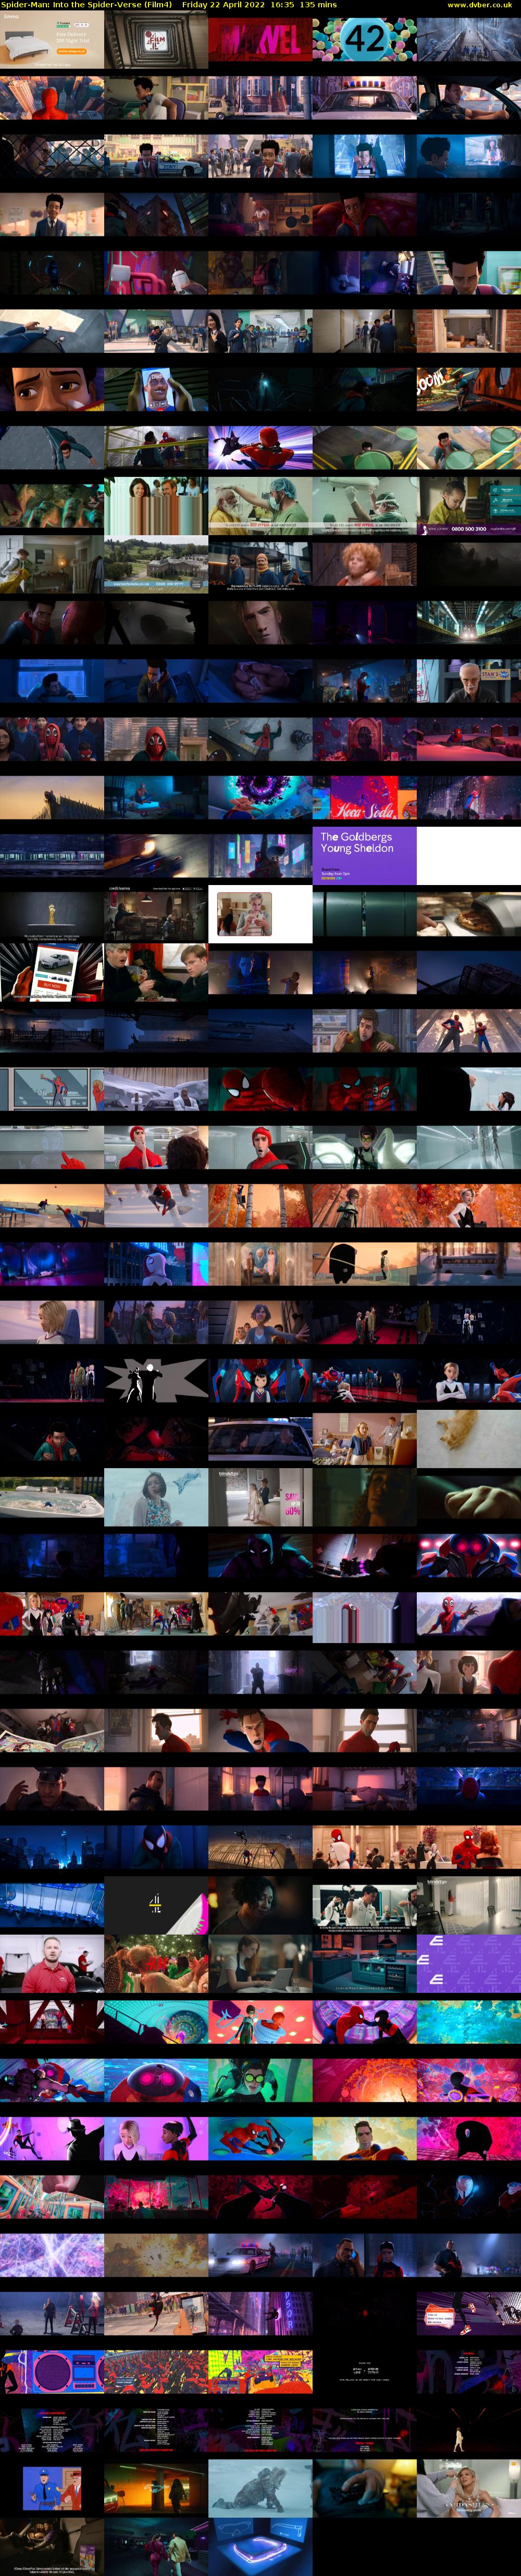 Spider-Man: Into the Spider-Verse (Film4) Friday 22 April 2022 16:35 - 18:50